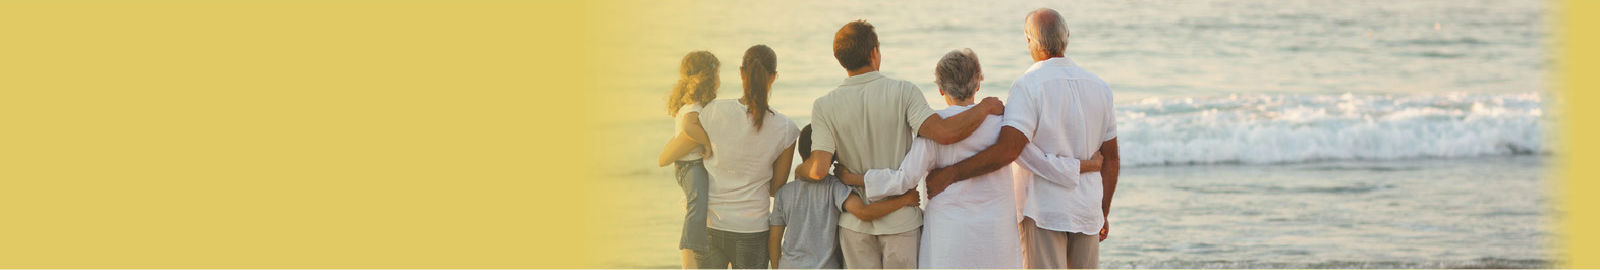 Funeral PrePlanning - Family on Beach Image